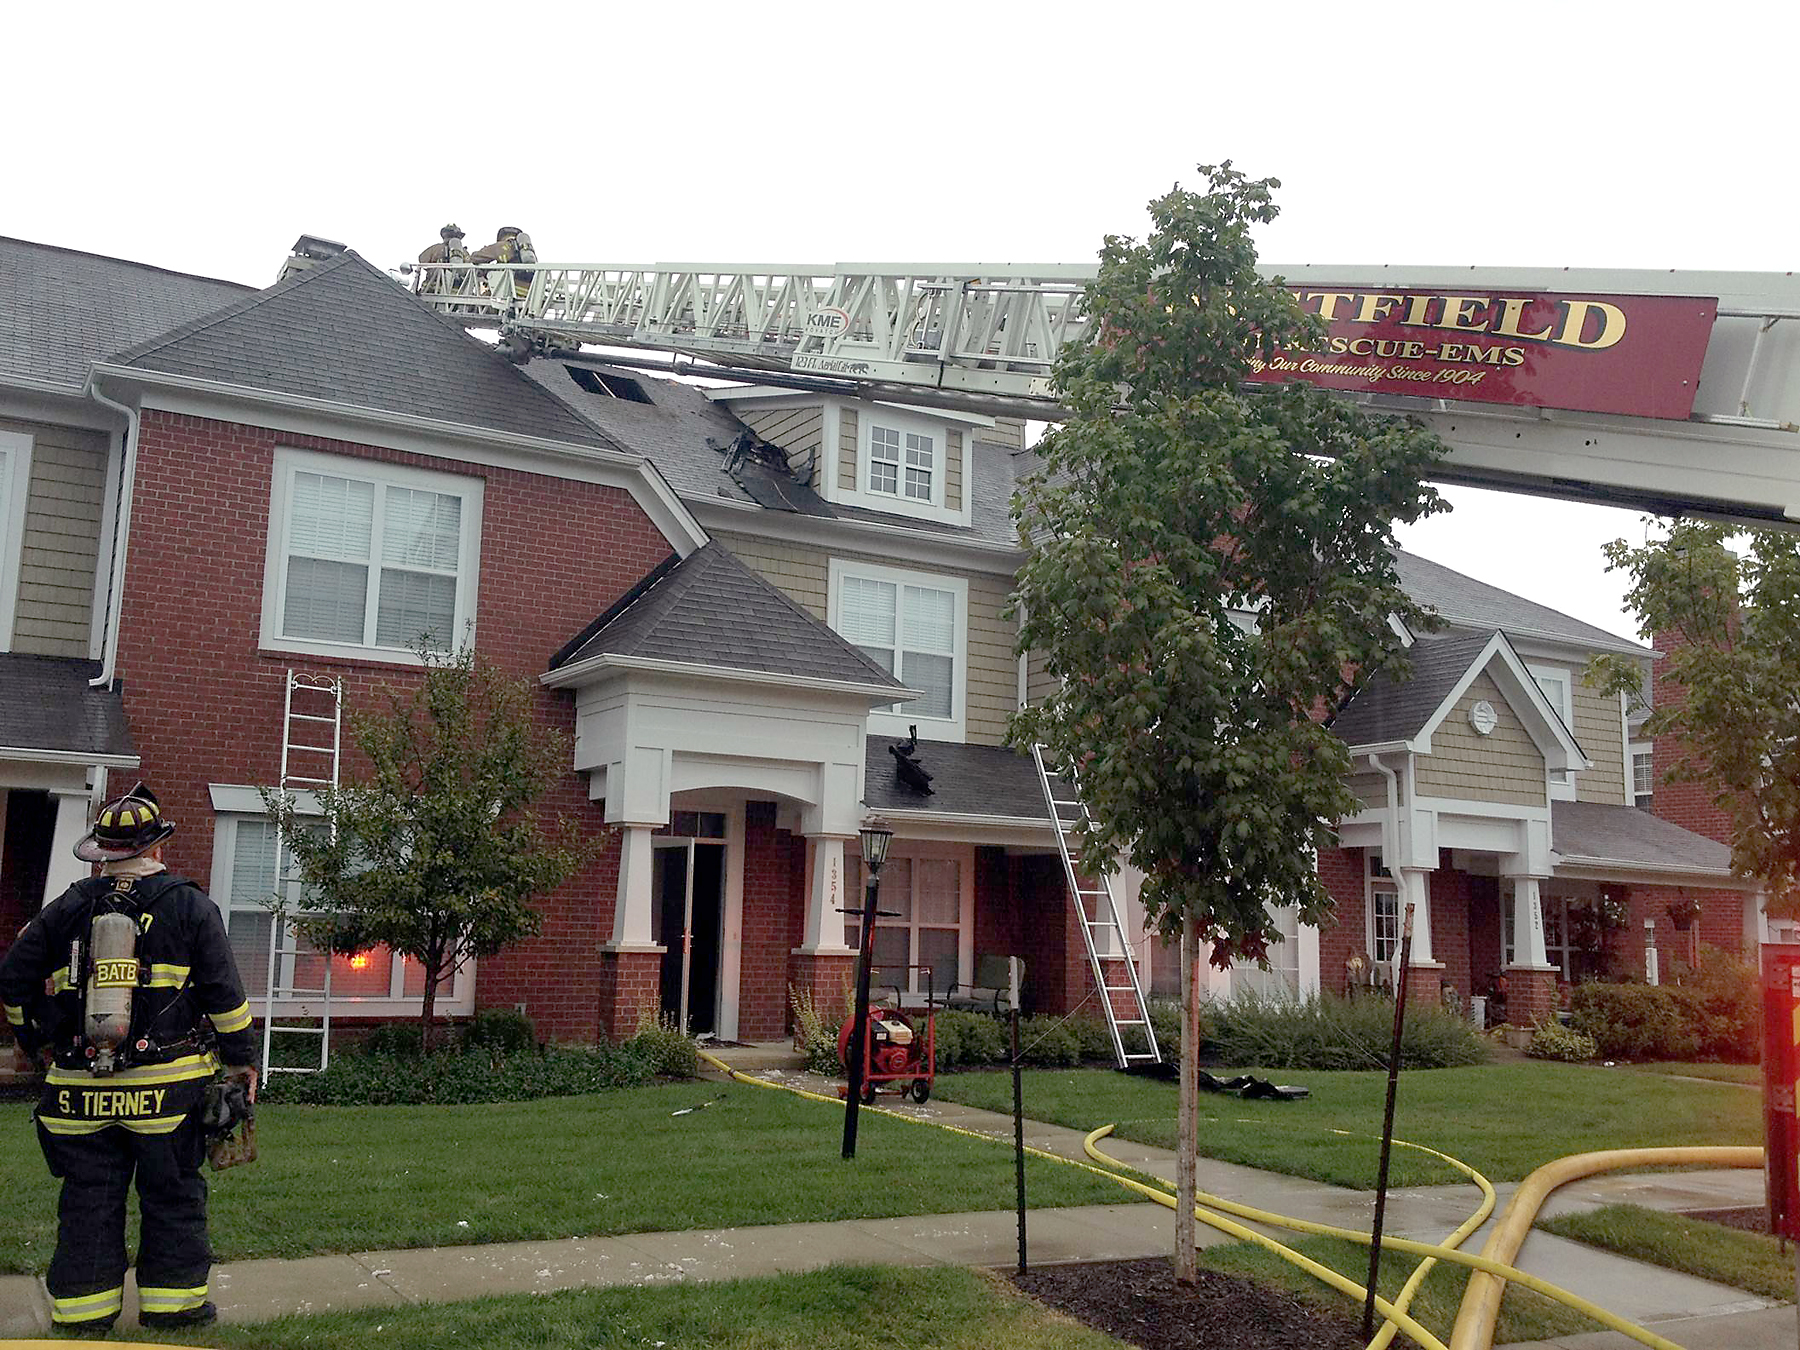 It took crews from Westfield, Noblesville and Carmel to extinguish the fire at 1354 Middlebury Dr.  (Submitted photo)